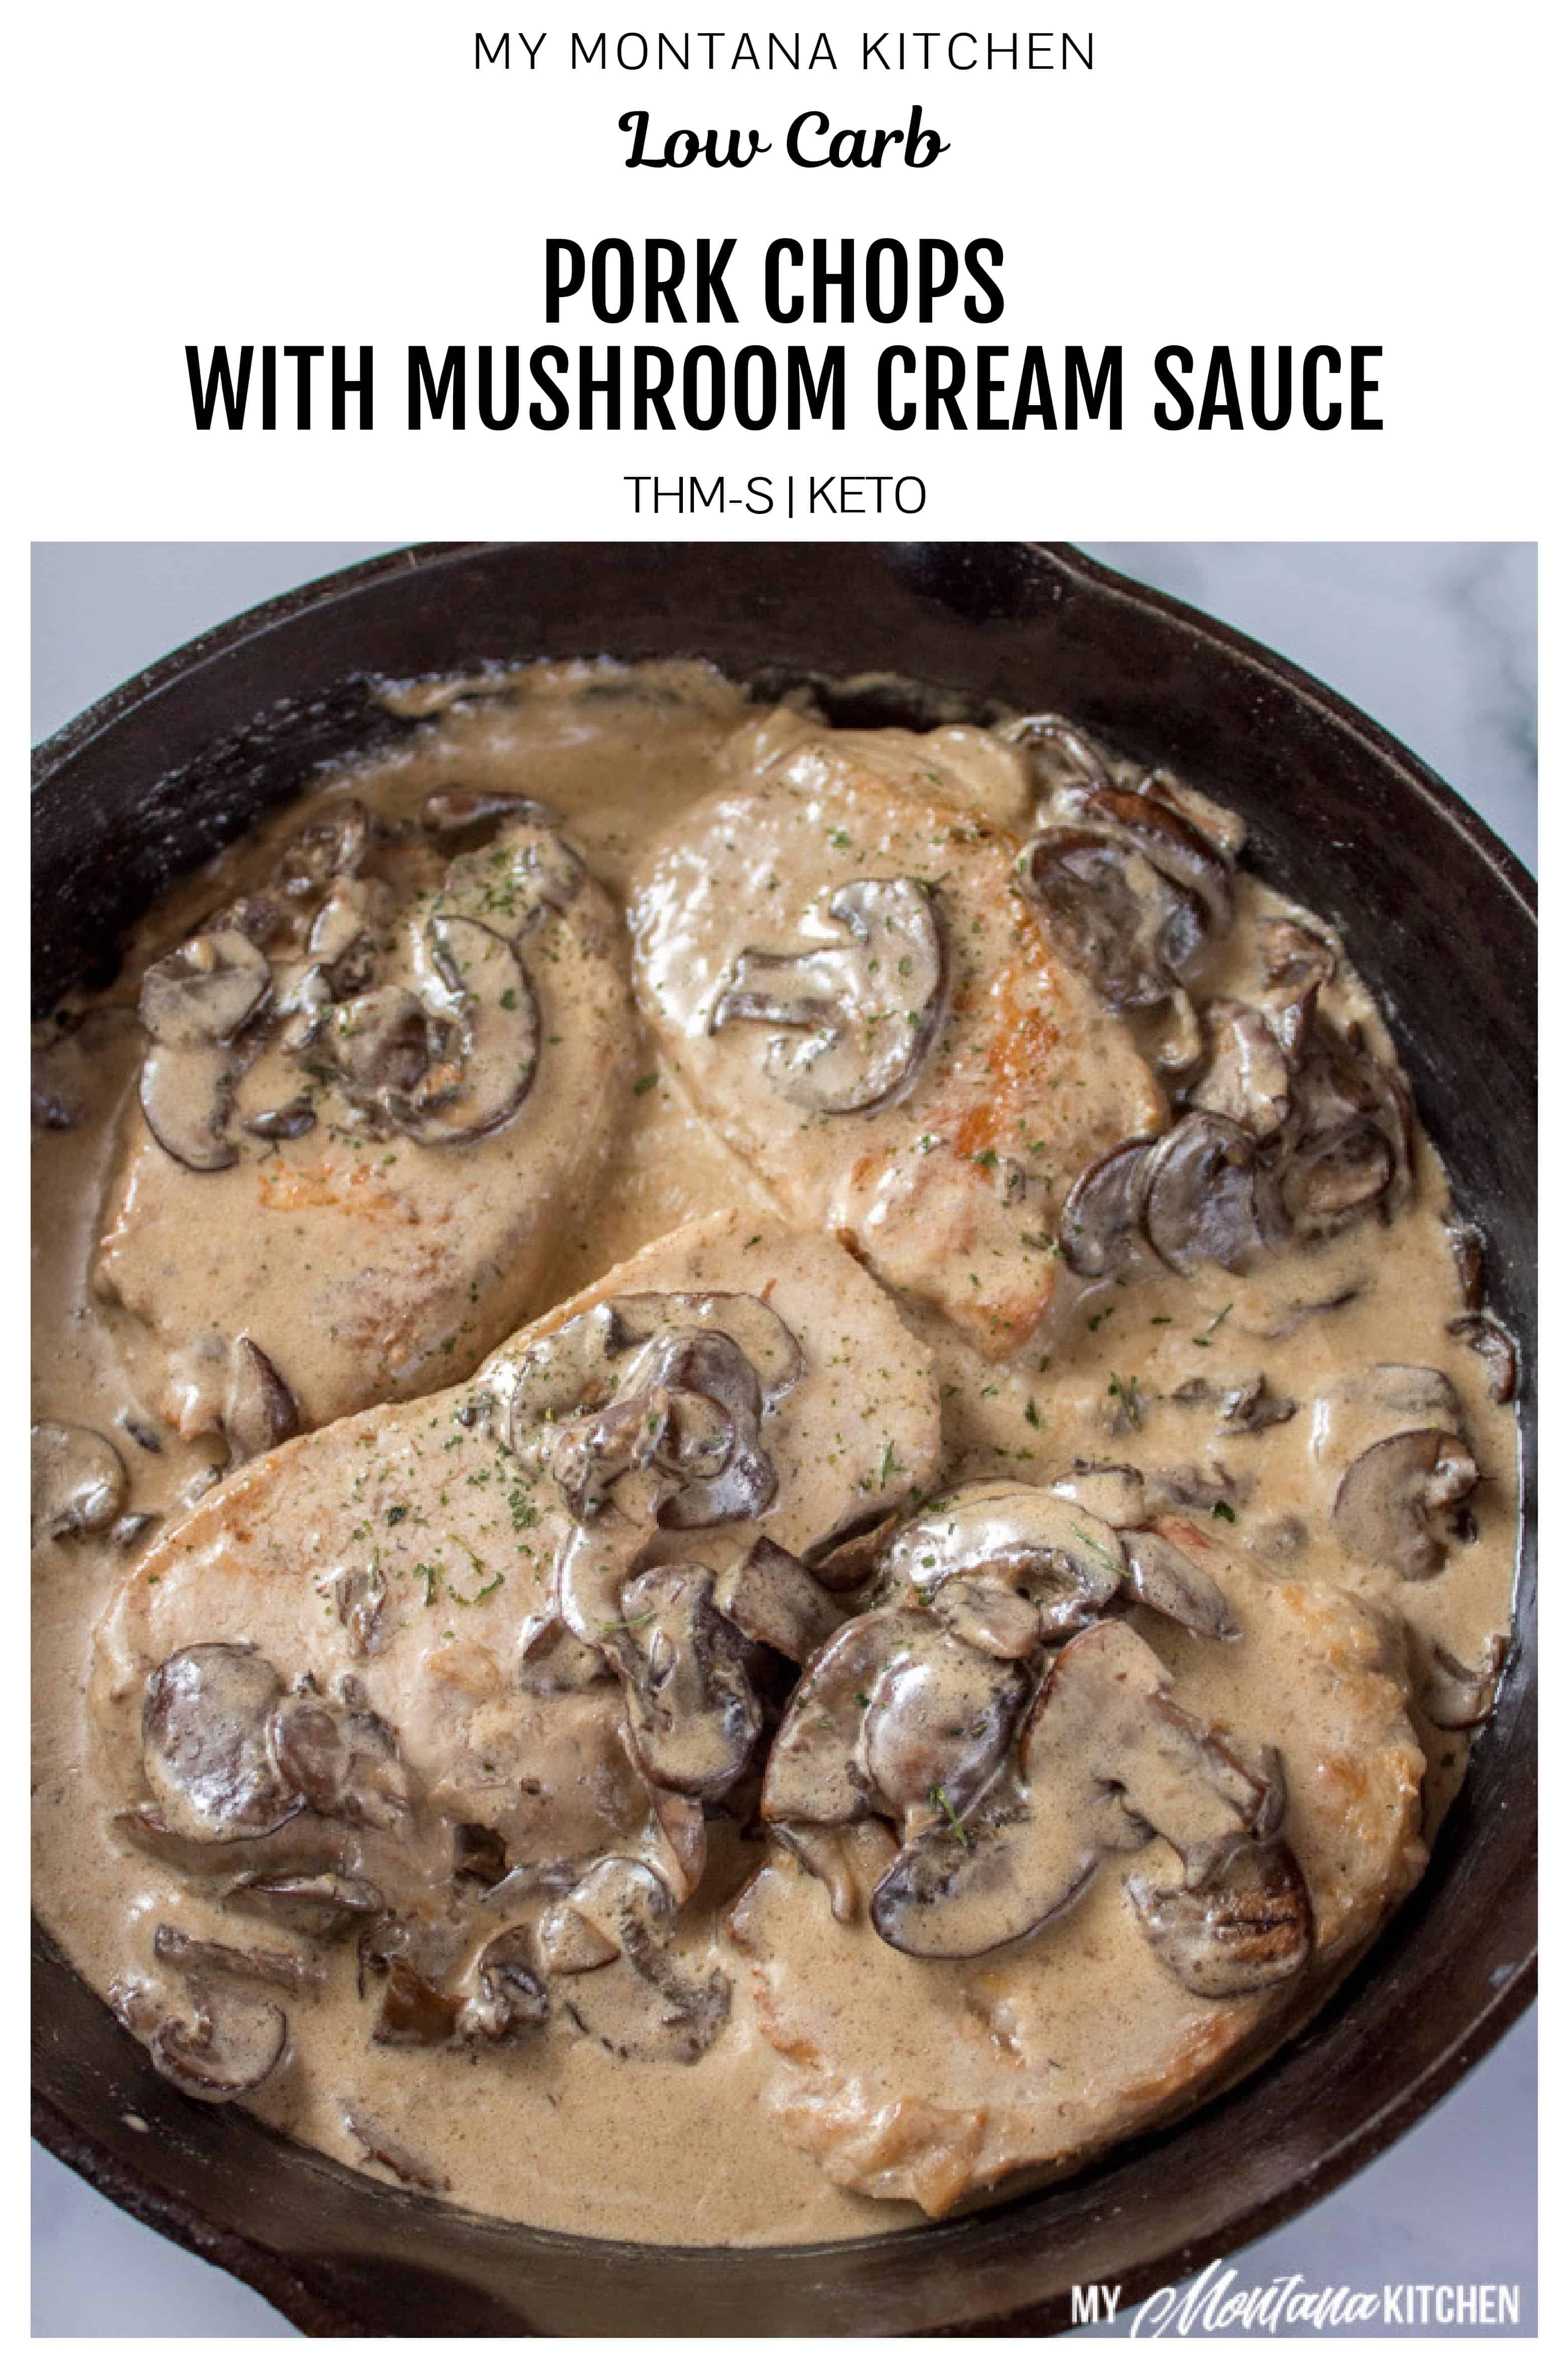 These pan seared pork chops topped with creamy mushroom sauce provide an easy, delicious, one skillet meal perfect for a busy weeknight dinner or a special occasion. You're going to love the gluten free pork chop gravy on top of your tender meat. This pan fried pork chops recipe has no flour and is low carb, but rich in flavor and sure to please. #skilletporkshops #mushroomgravy